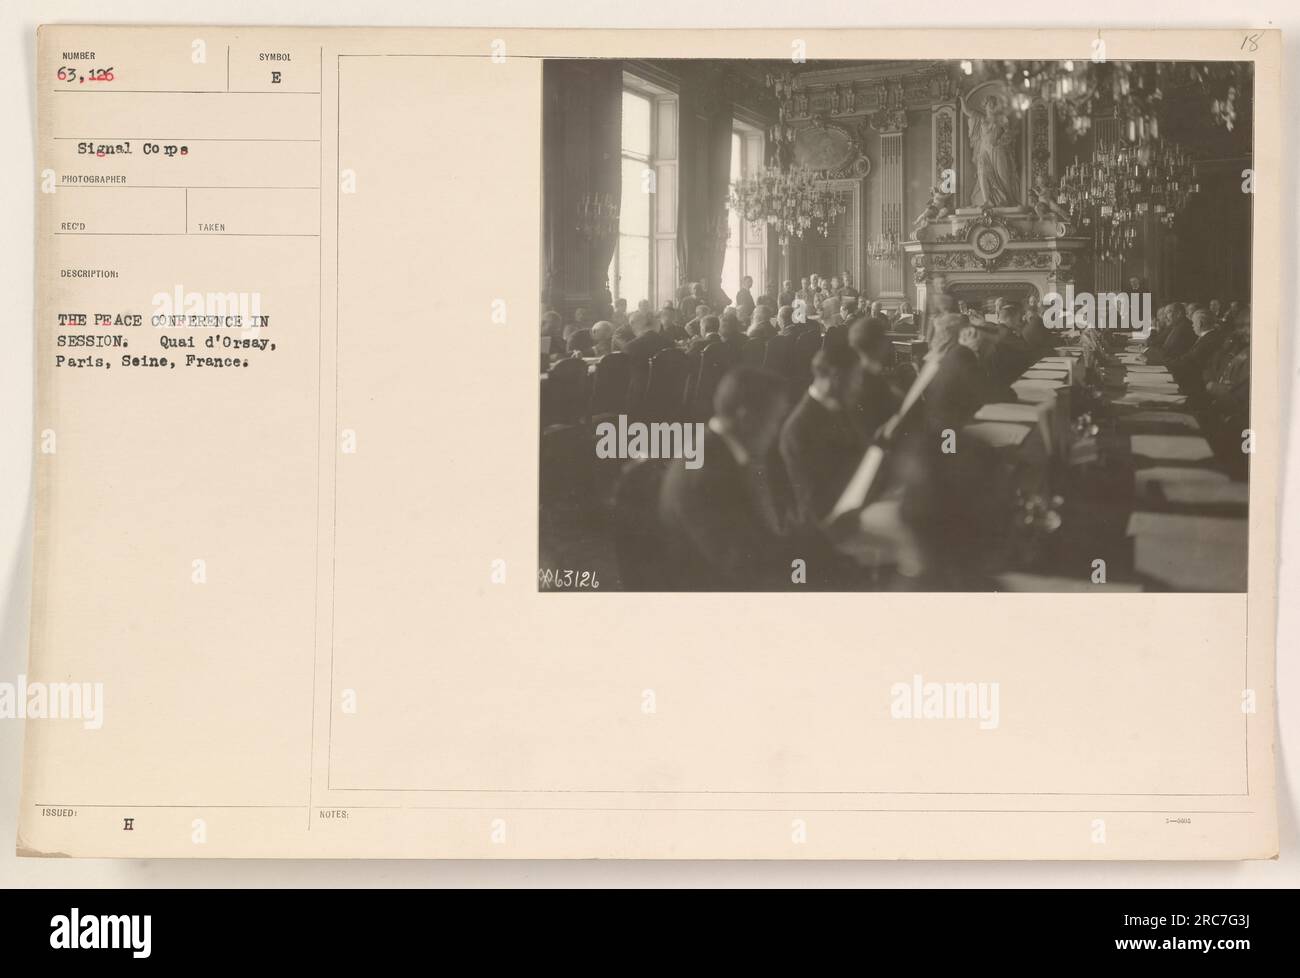 Delegates at the Peace Conference in session at the Quai d'Orsay in Paris, France. The photograph was taken during World War One by the Signal Company and was issued as part of a collection documenting American military activities. Stock Photo